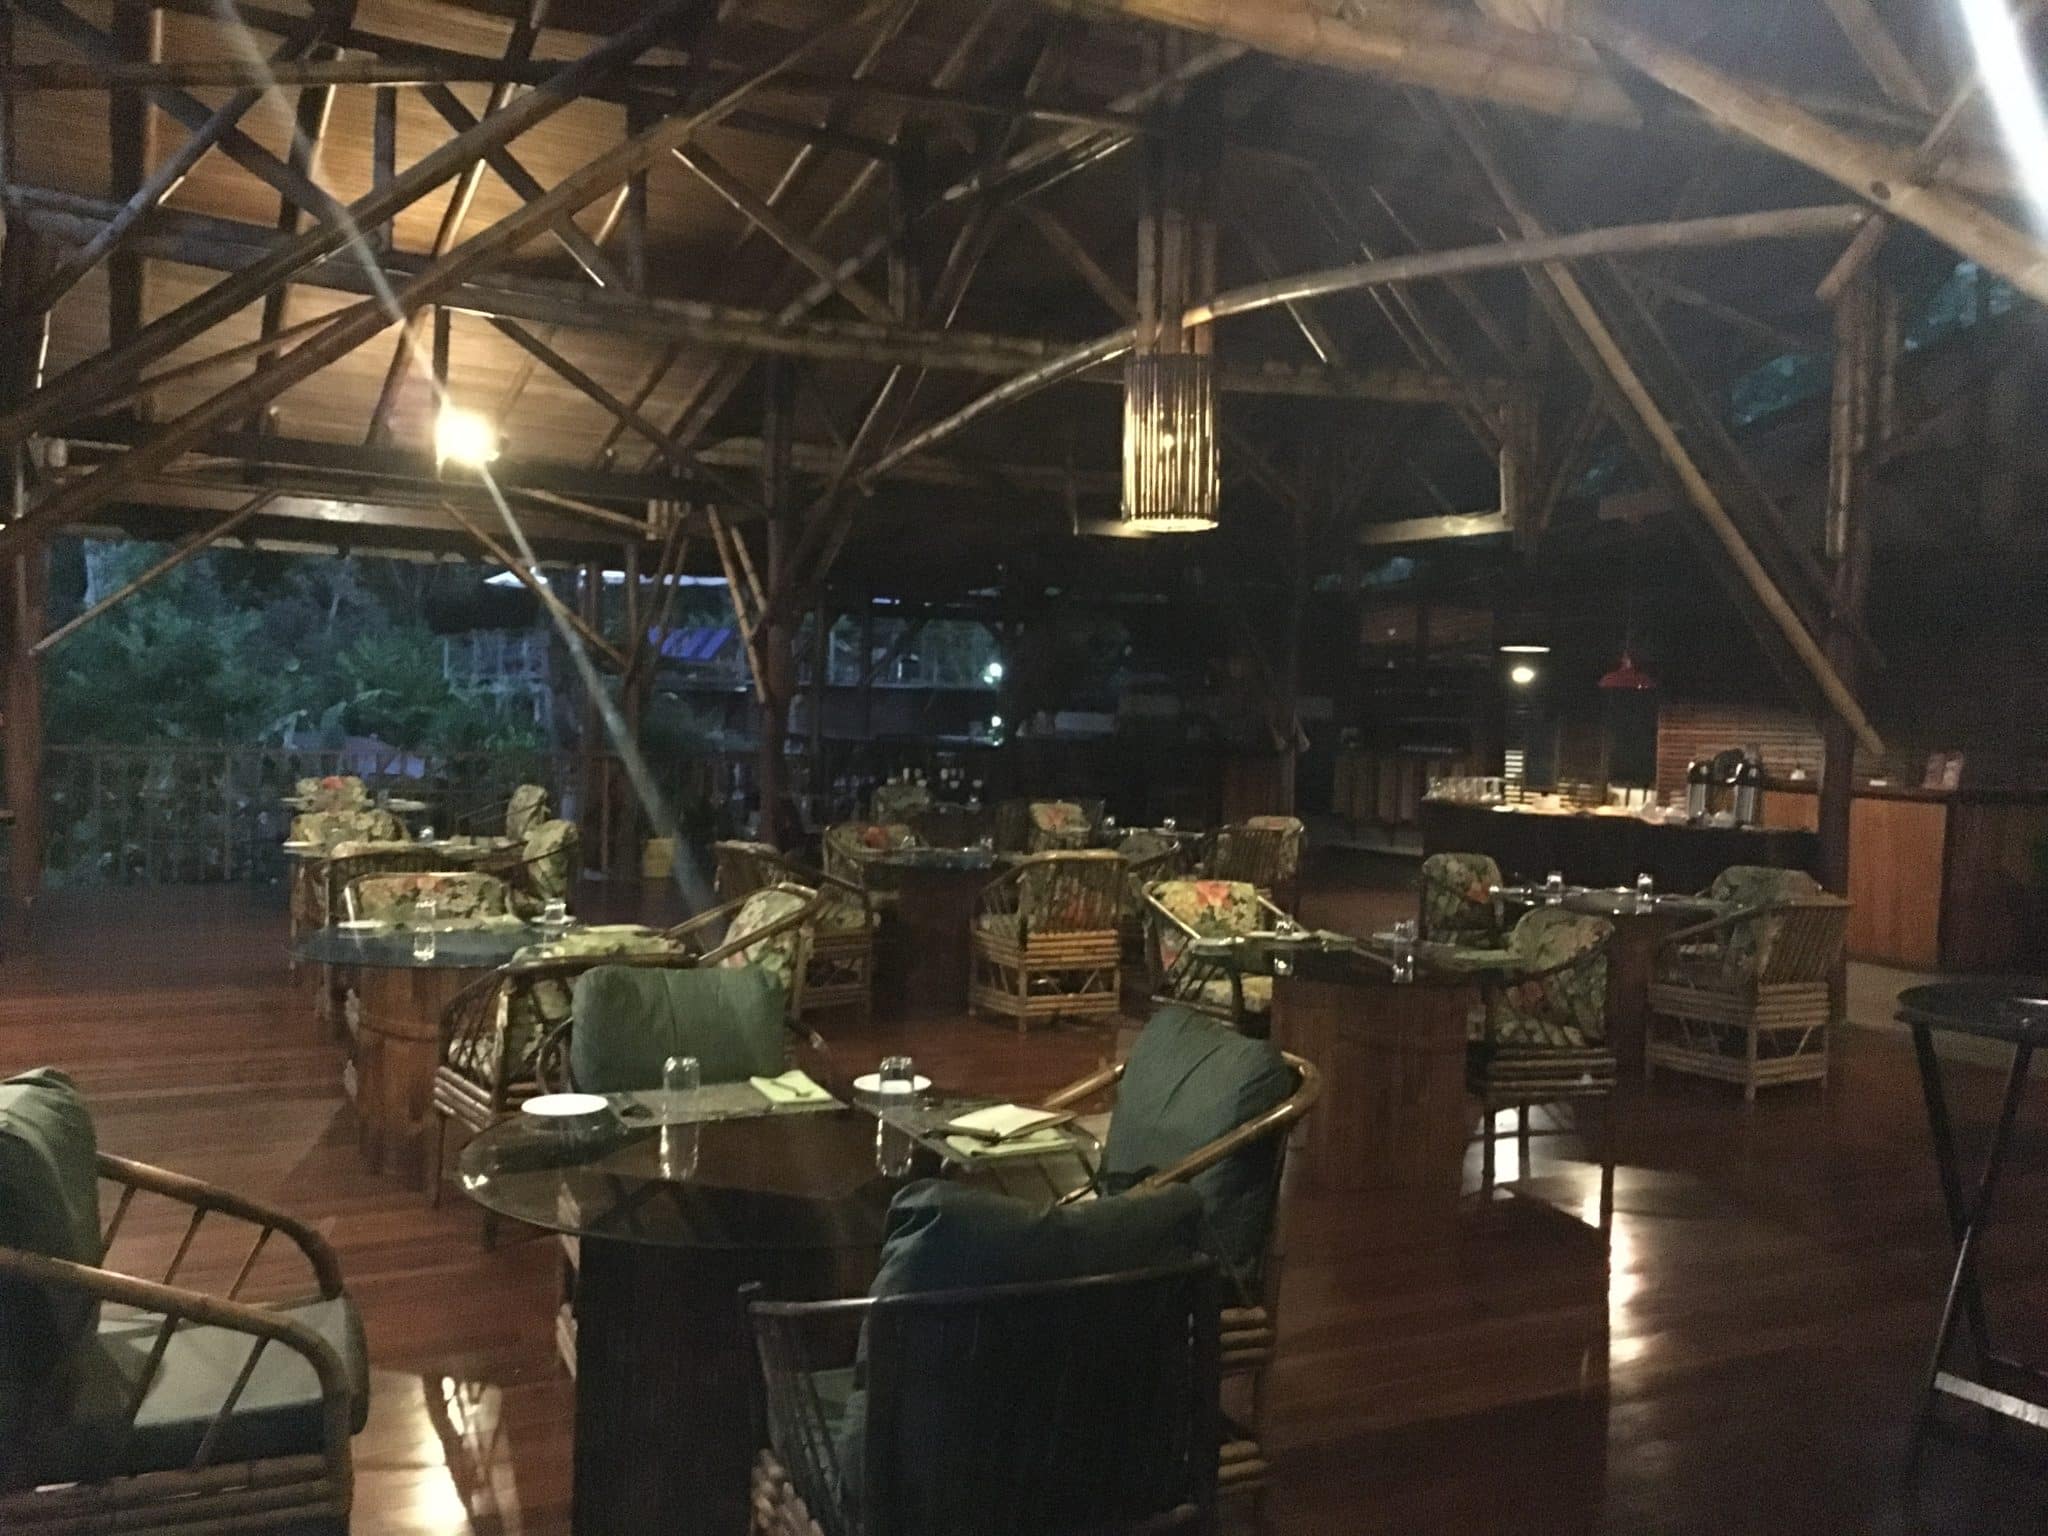 A remote rainforest stay at El Remanso Lodge